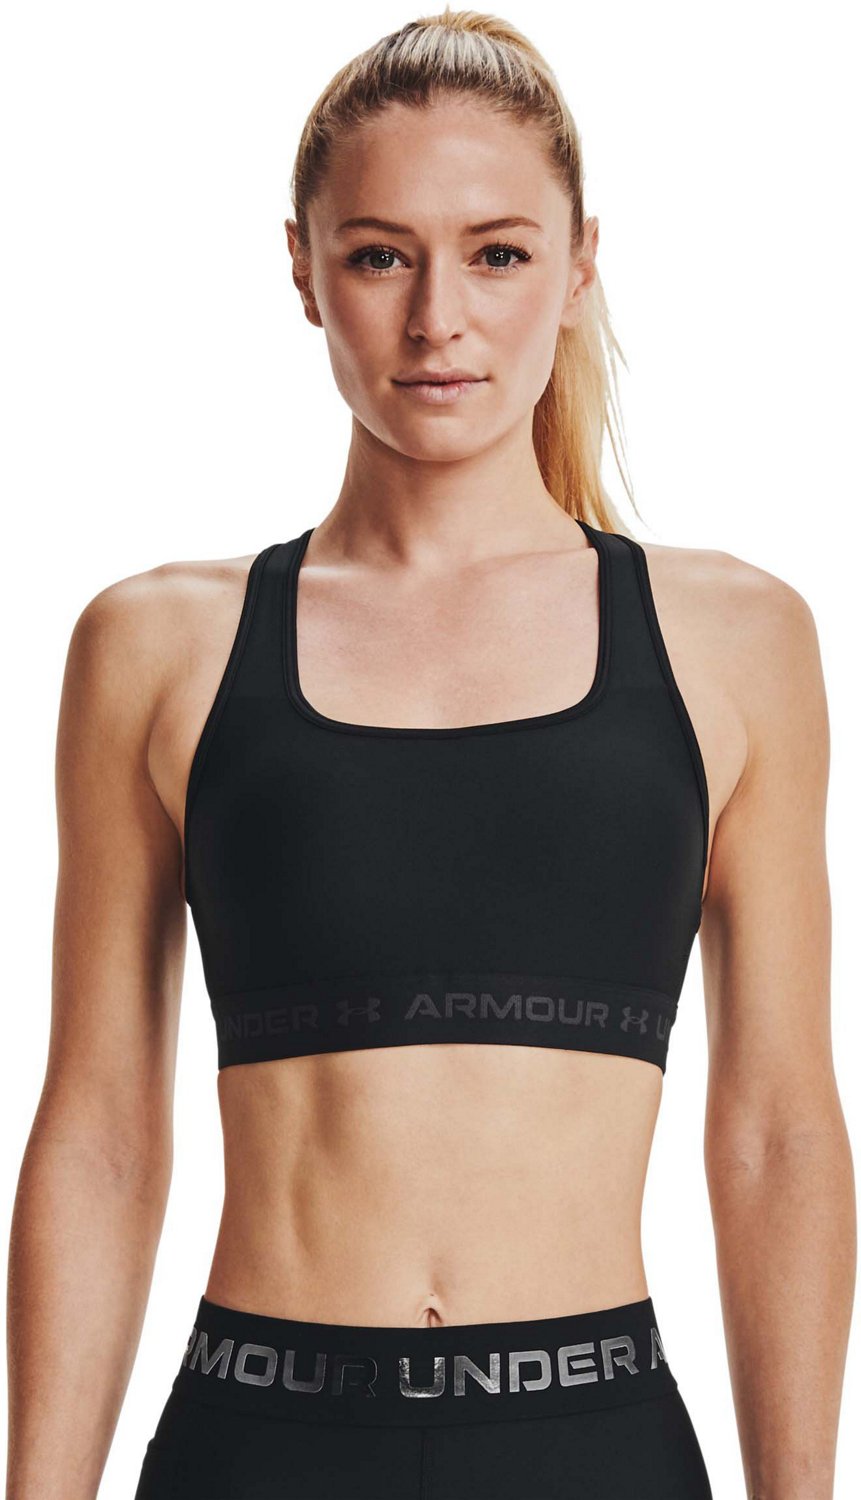 Women's Under Armour Clothing